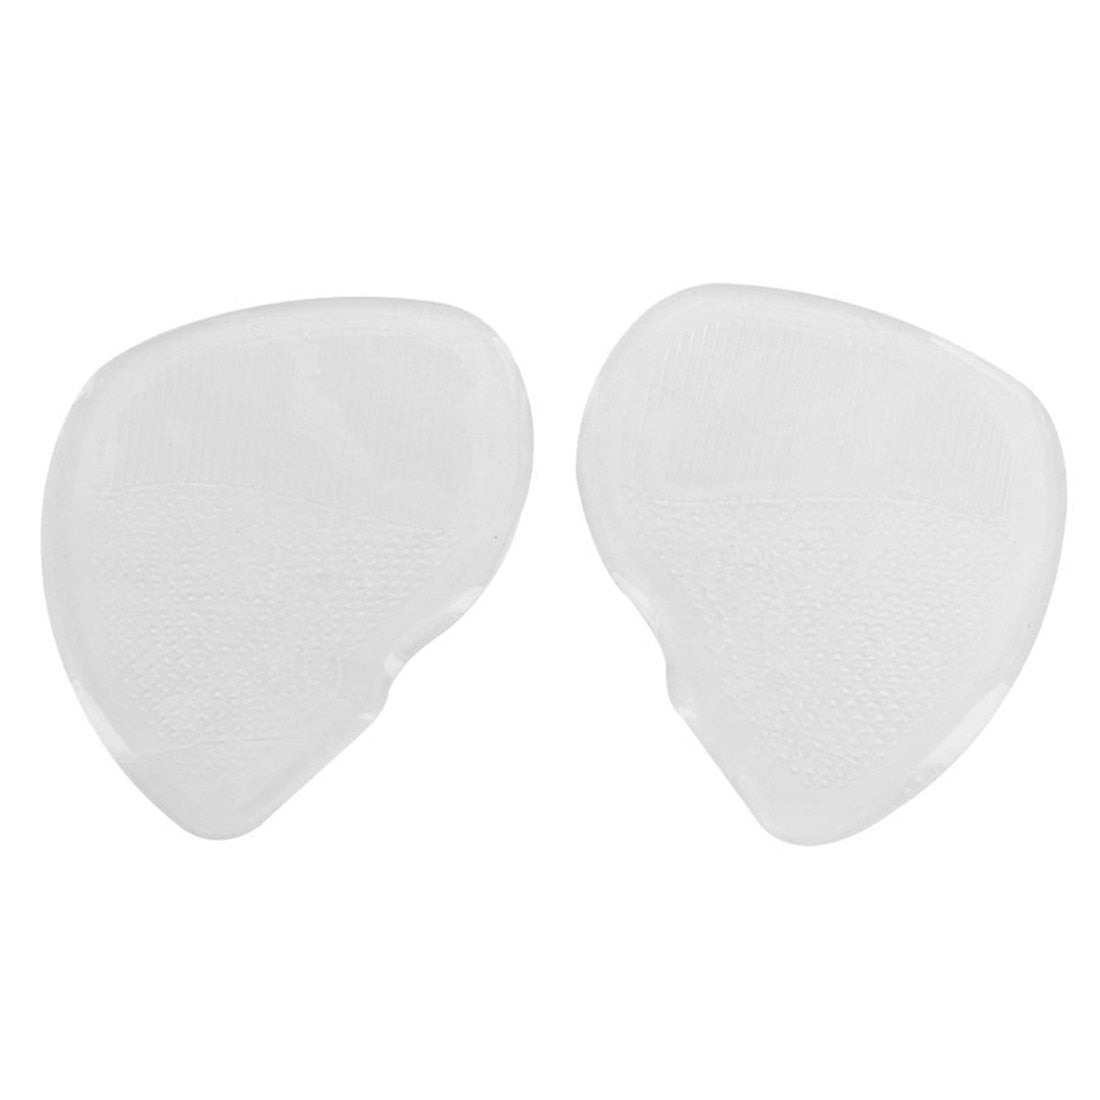 1 Pair of non-slip palm rest massage Pad Forefoot Pads Forefoot pad in transparent silicone gel - ebowsos